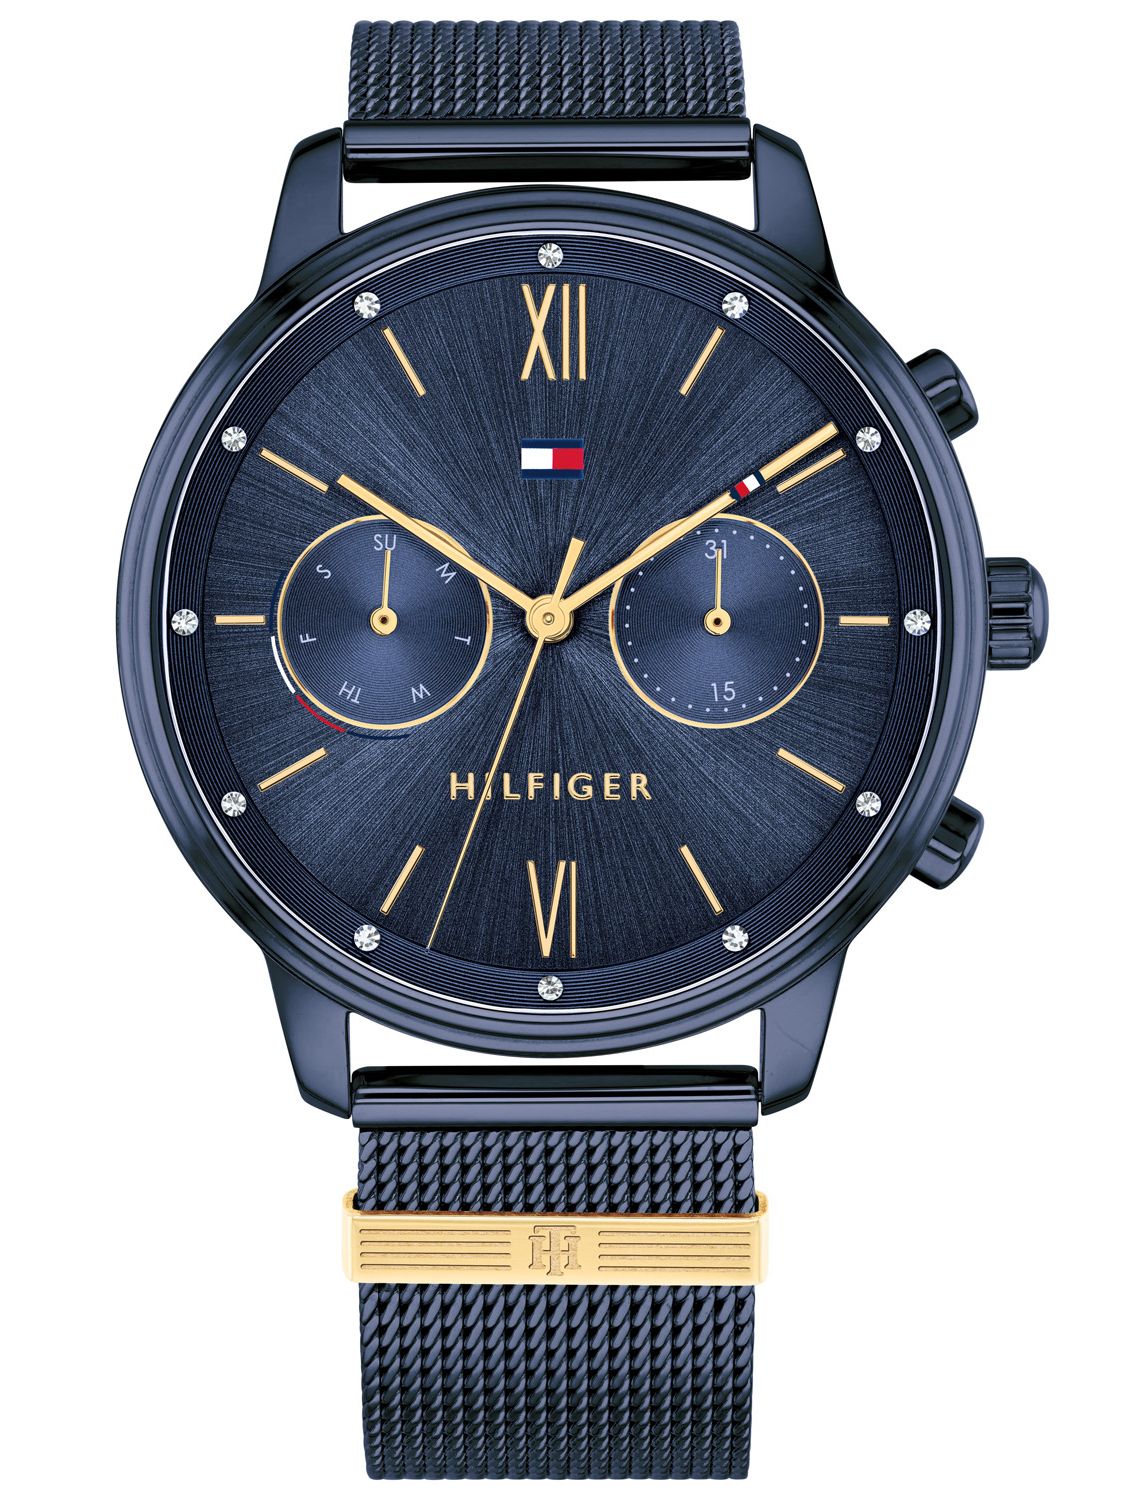 tommy hilfiger blue and gold watch